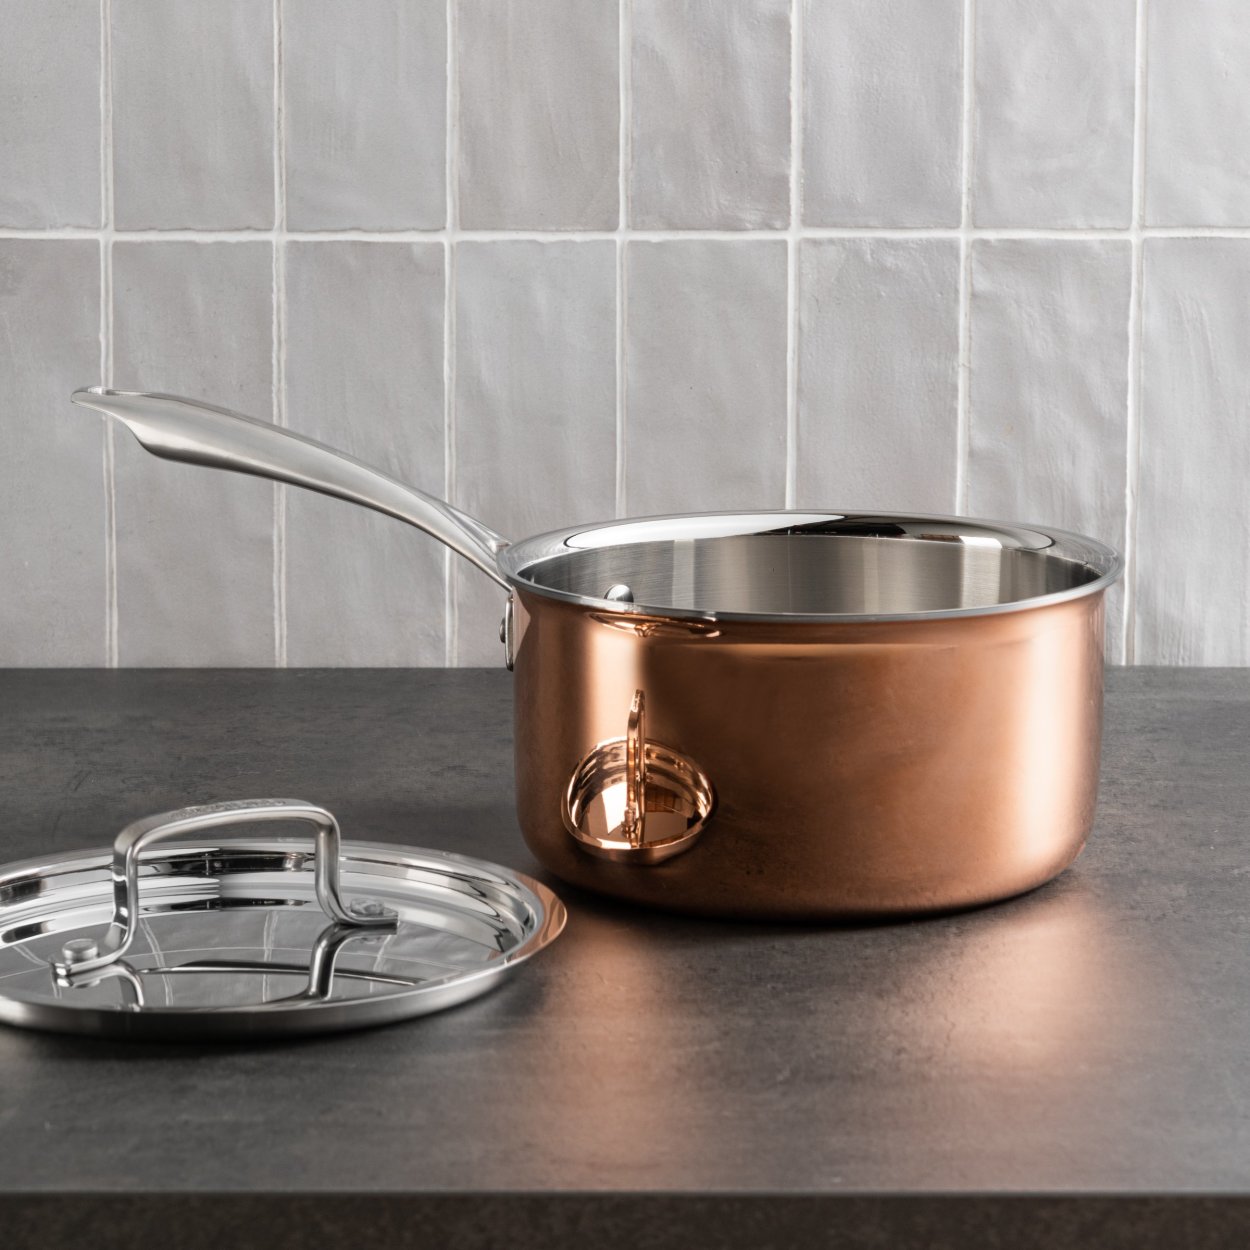 Cuisinart Copper/Stainless steel Tri-Ply 8-Piece Cookware Set